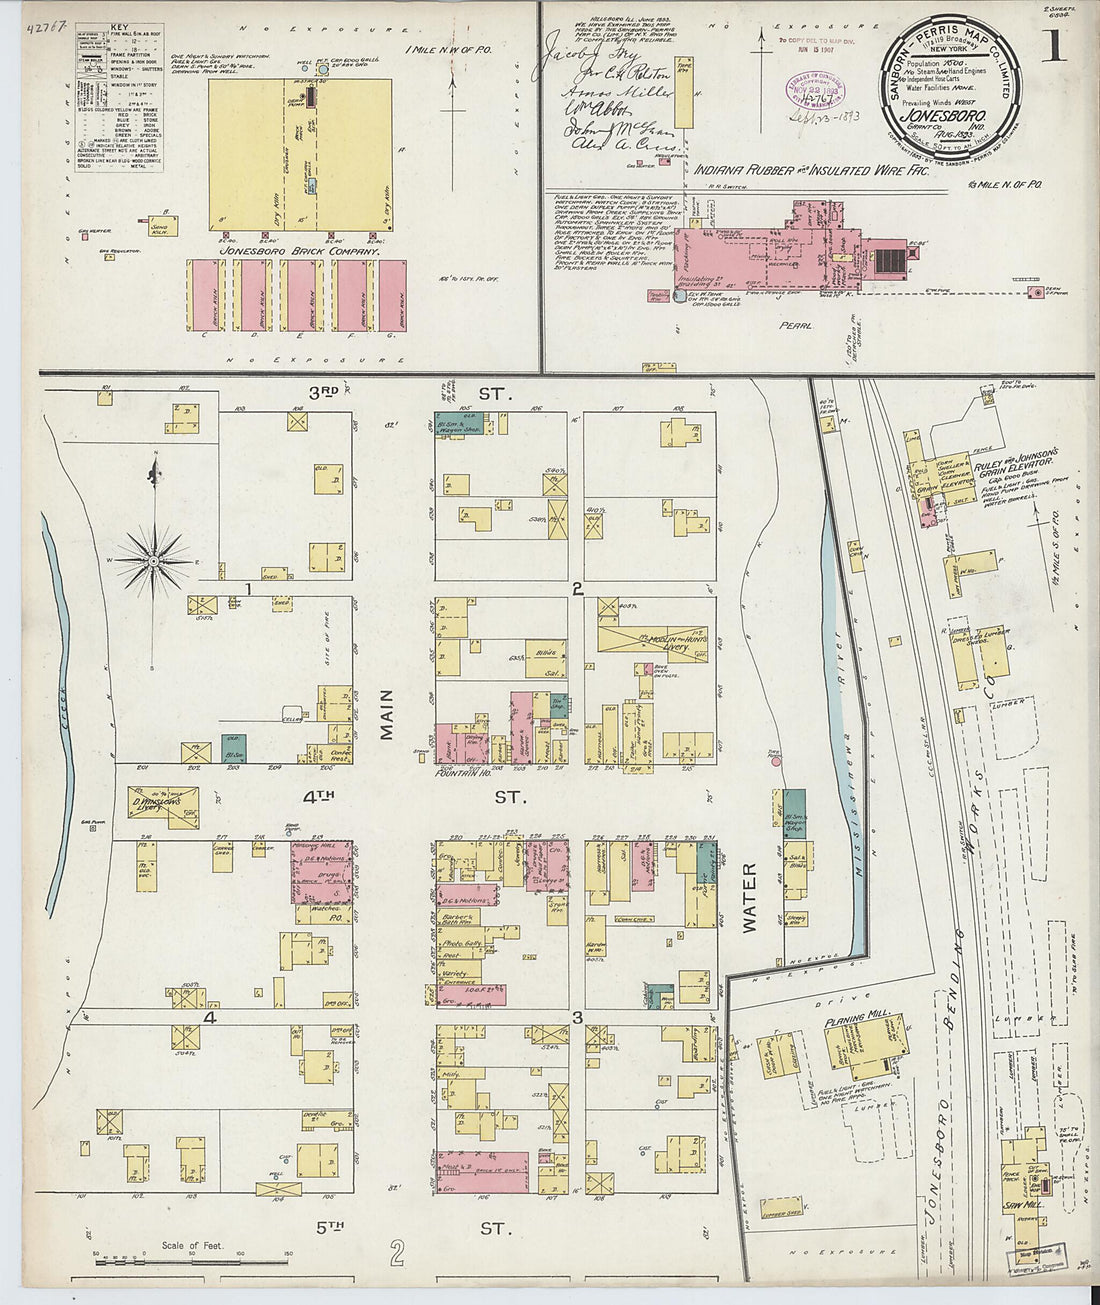 This old map of Jonesboro, Grant County, Indiana was created by Sanborn Map Company in 1893